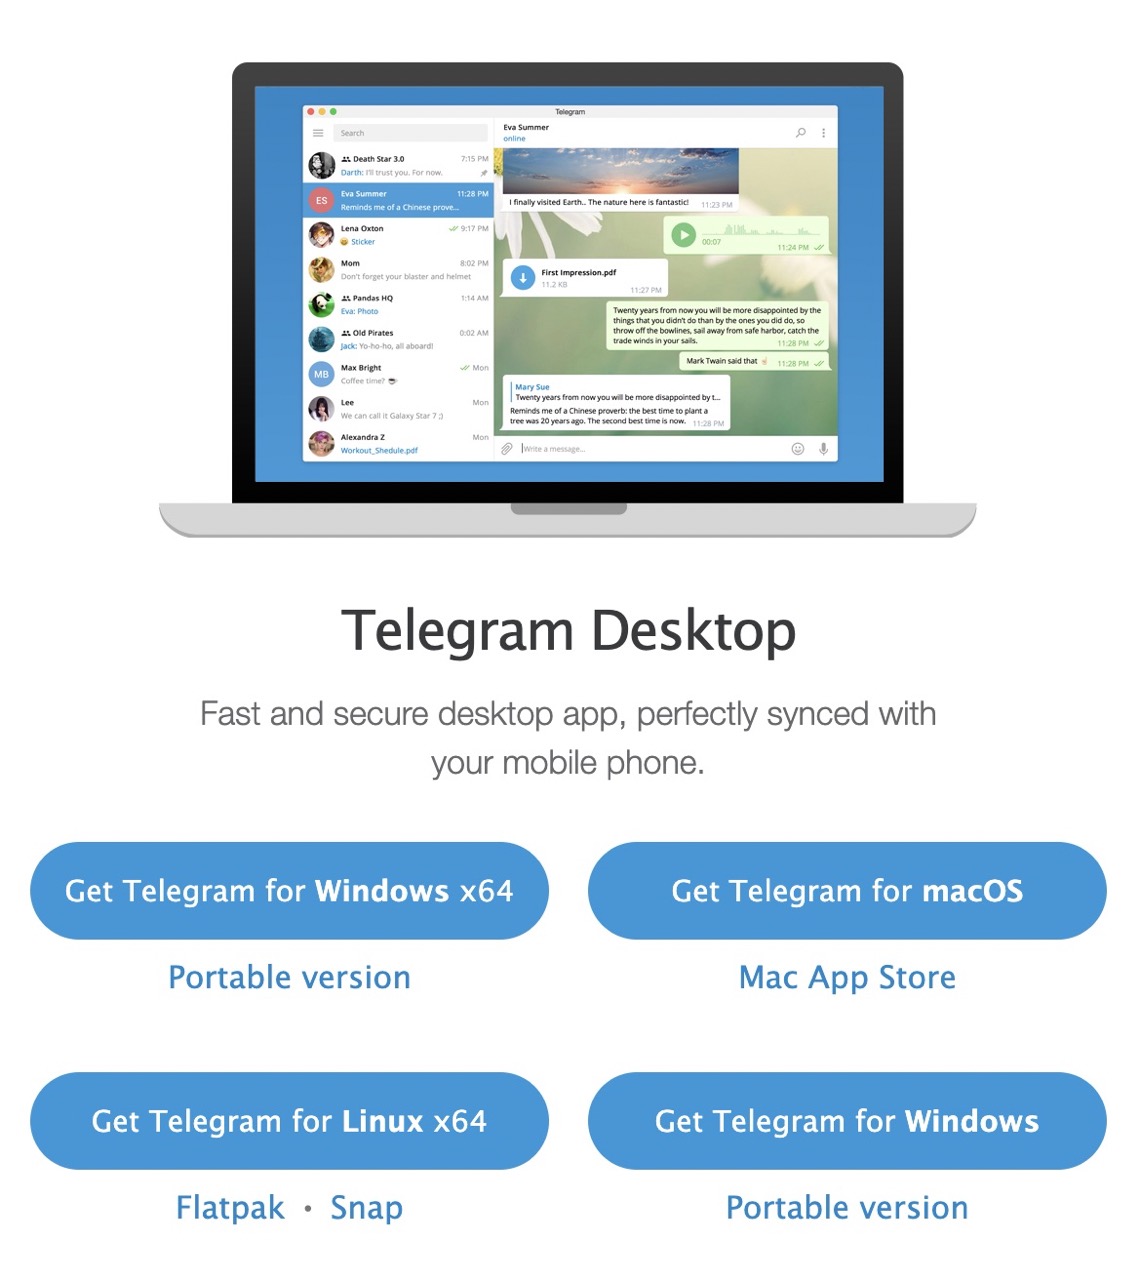 How to sign up for Telegram